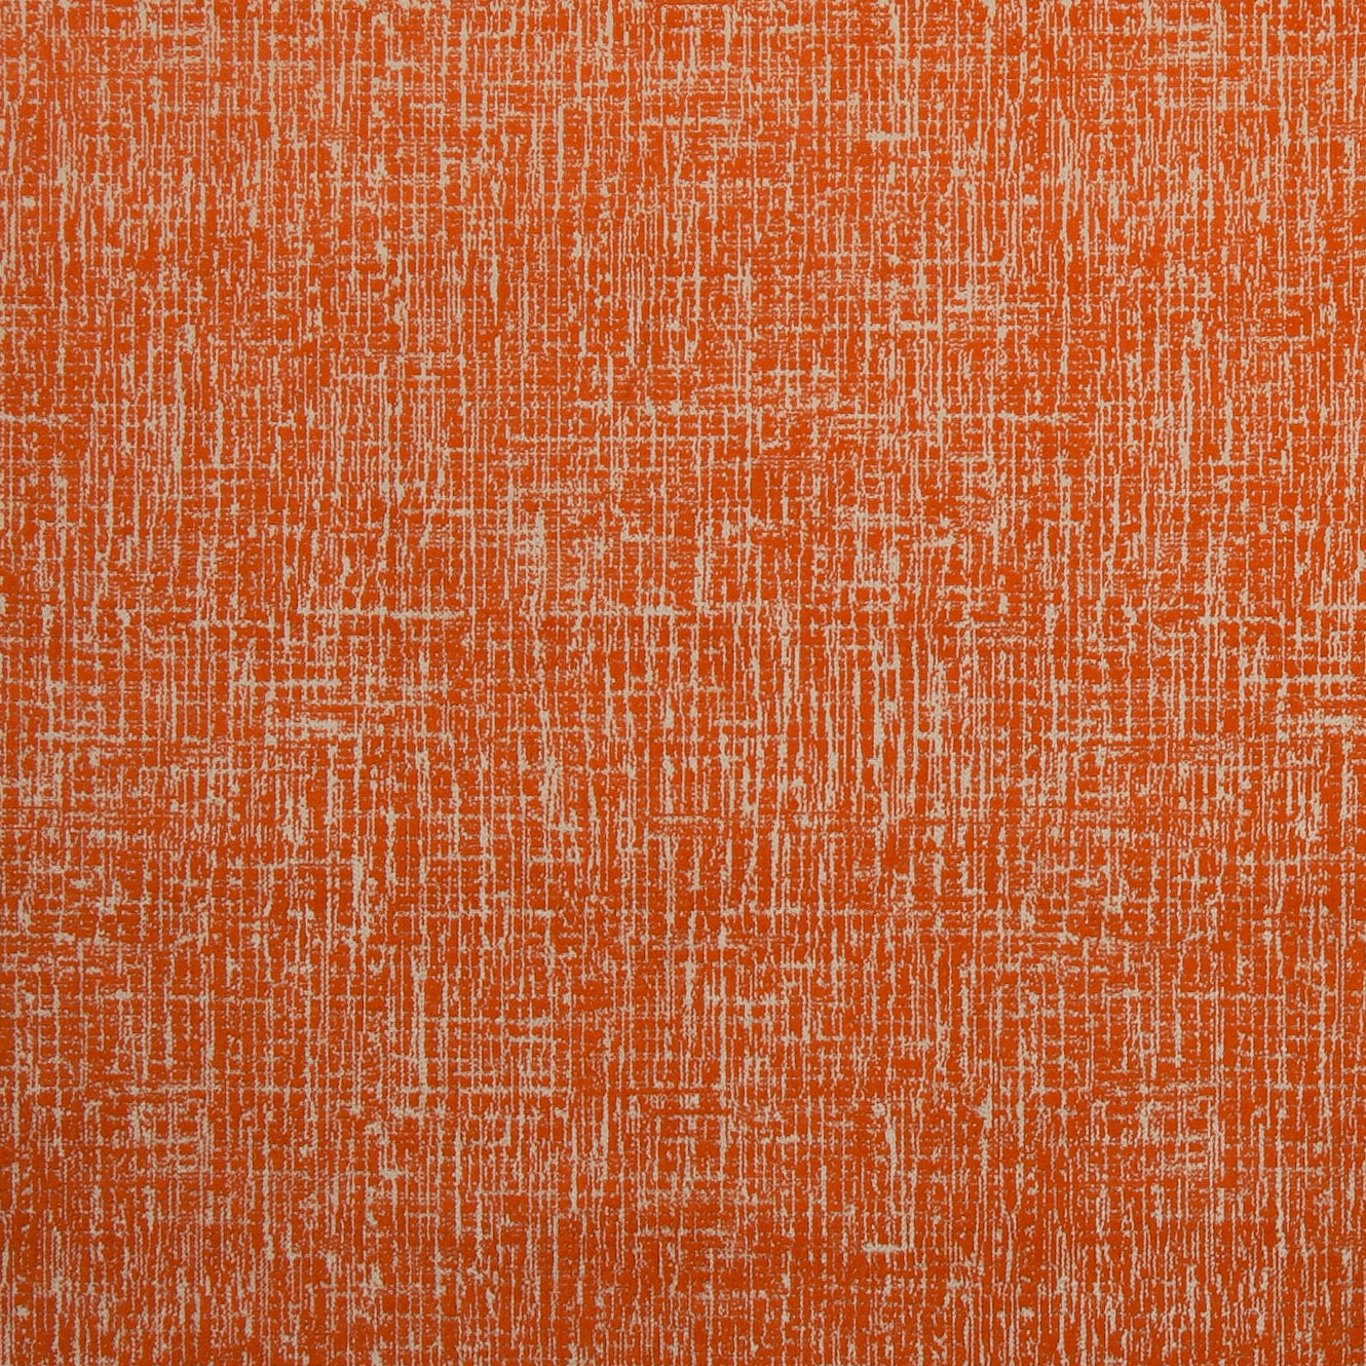 Patina Spice Fabric by CNC